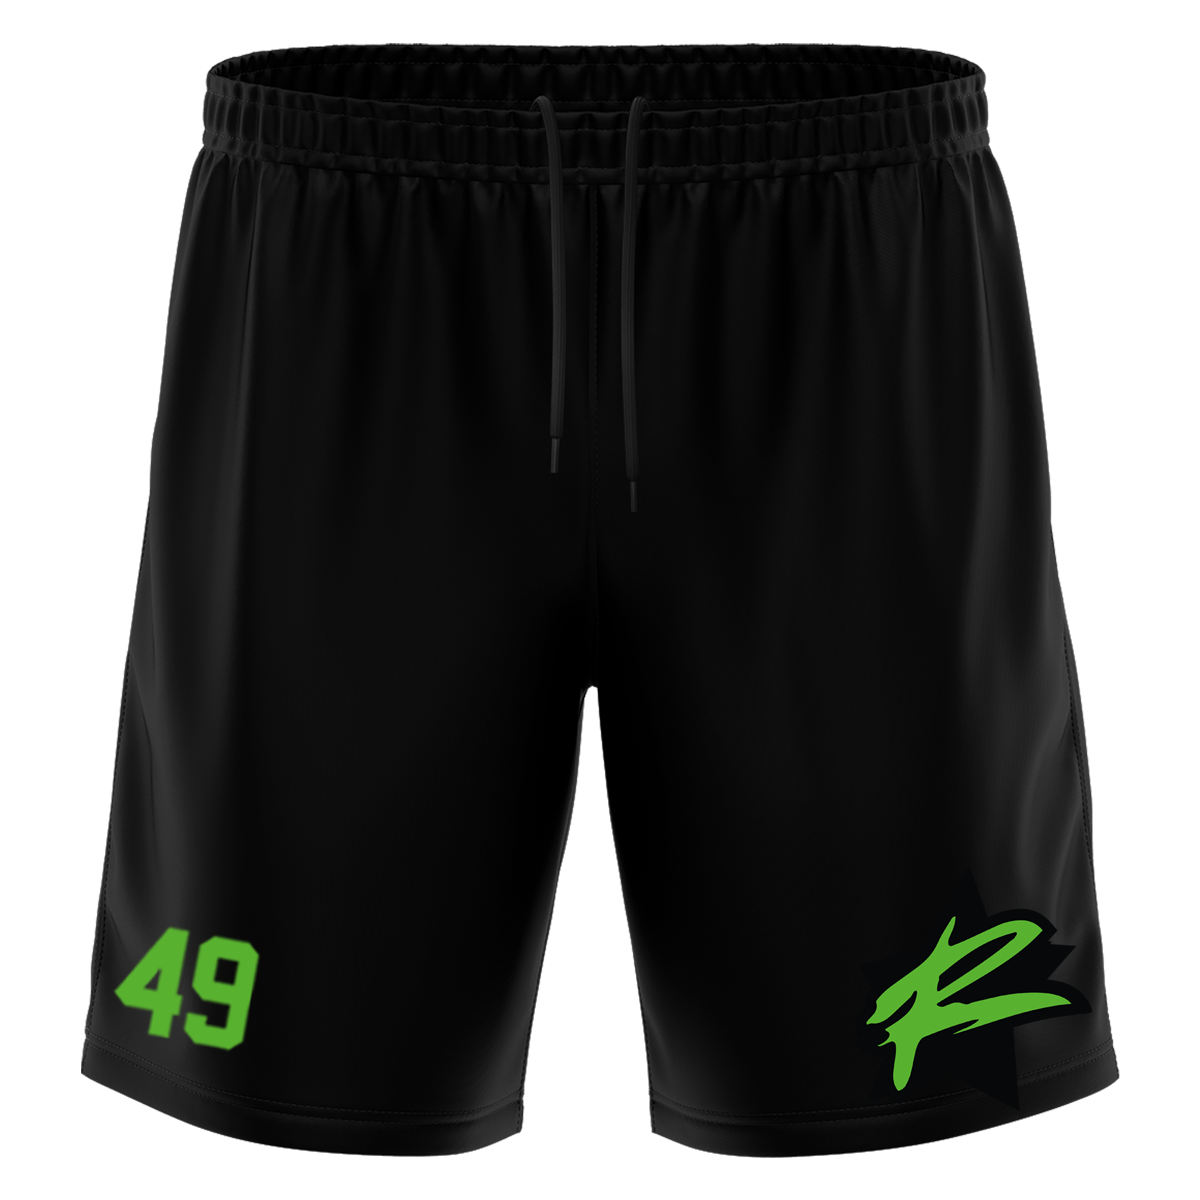 Rebels Training Short with Playernumber or Initials